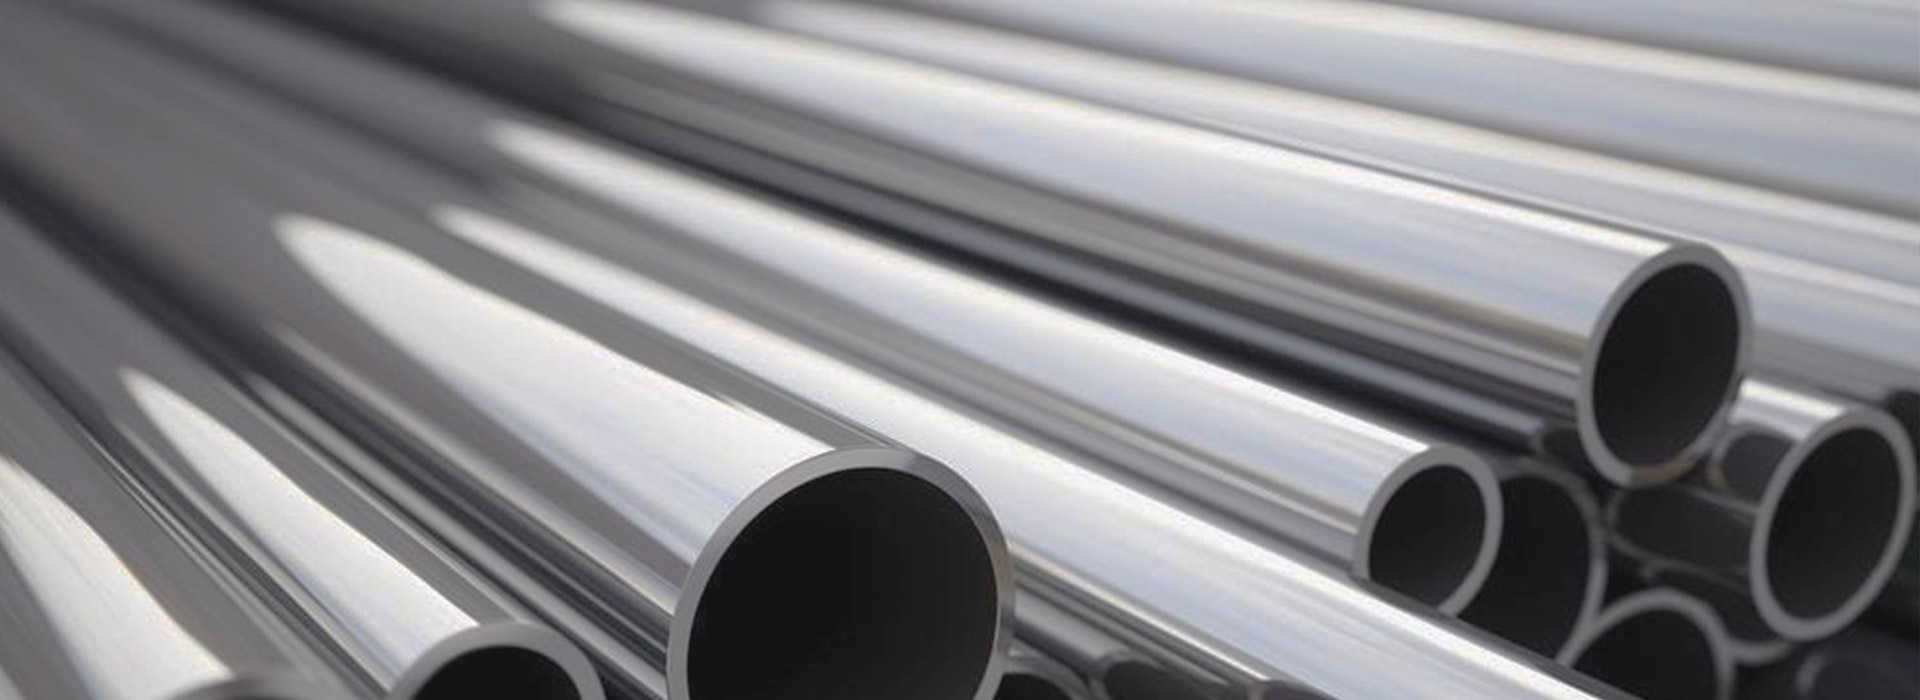 Stainless-Steel-pipe